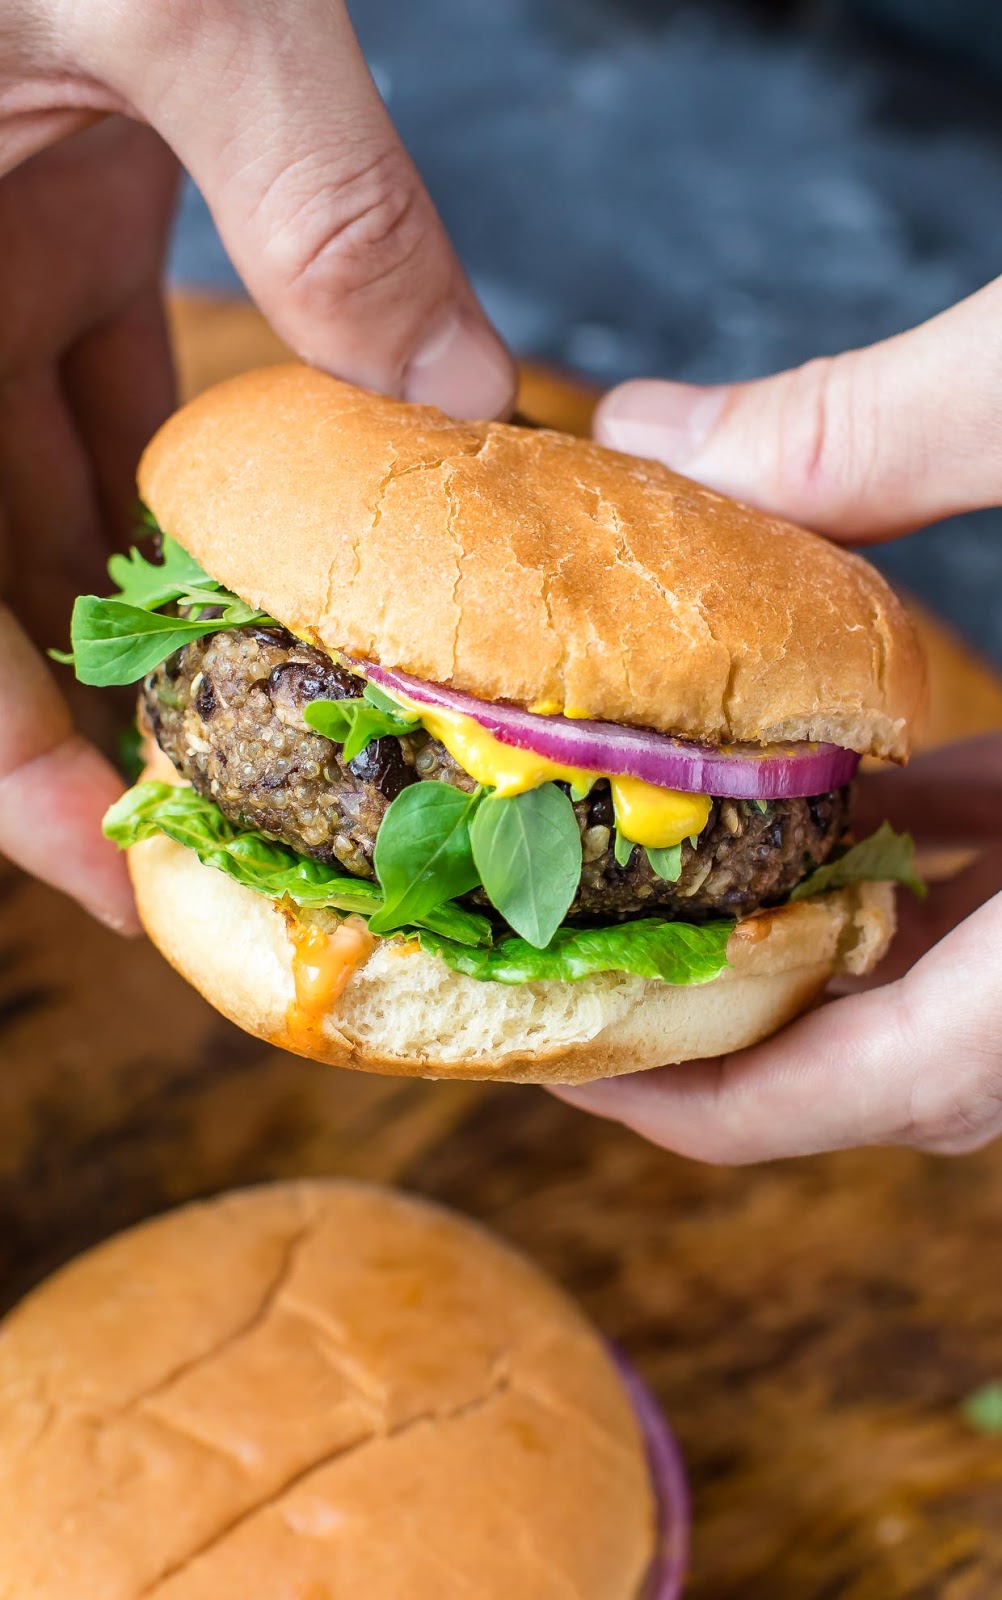 Happy Healthy Families: 5 Easy to Make Black Bean Burger Recipes Your